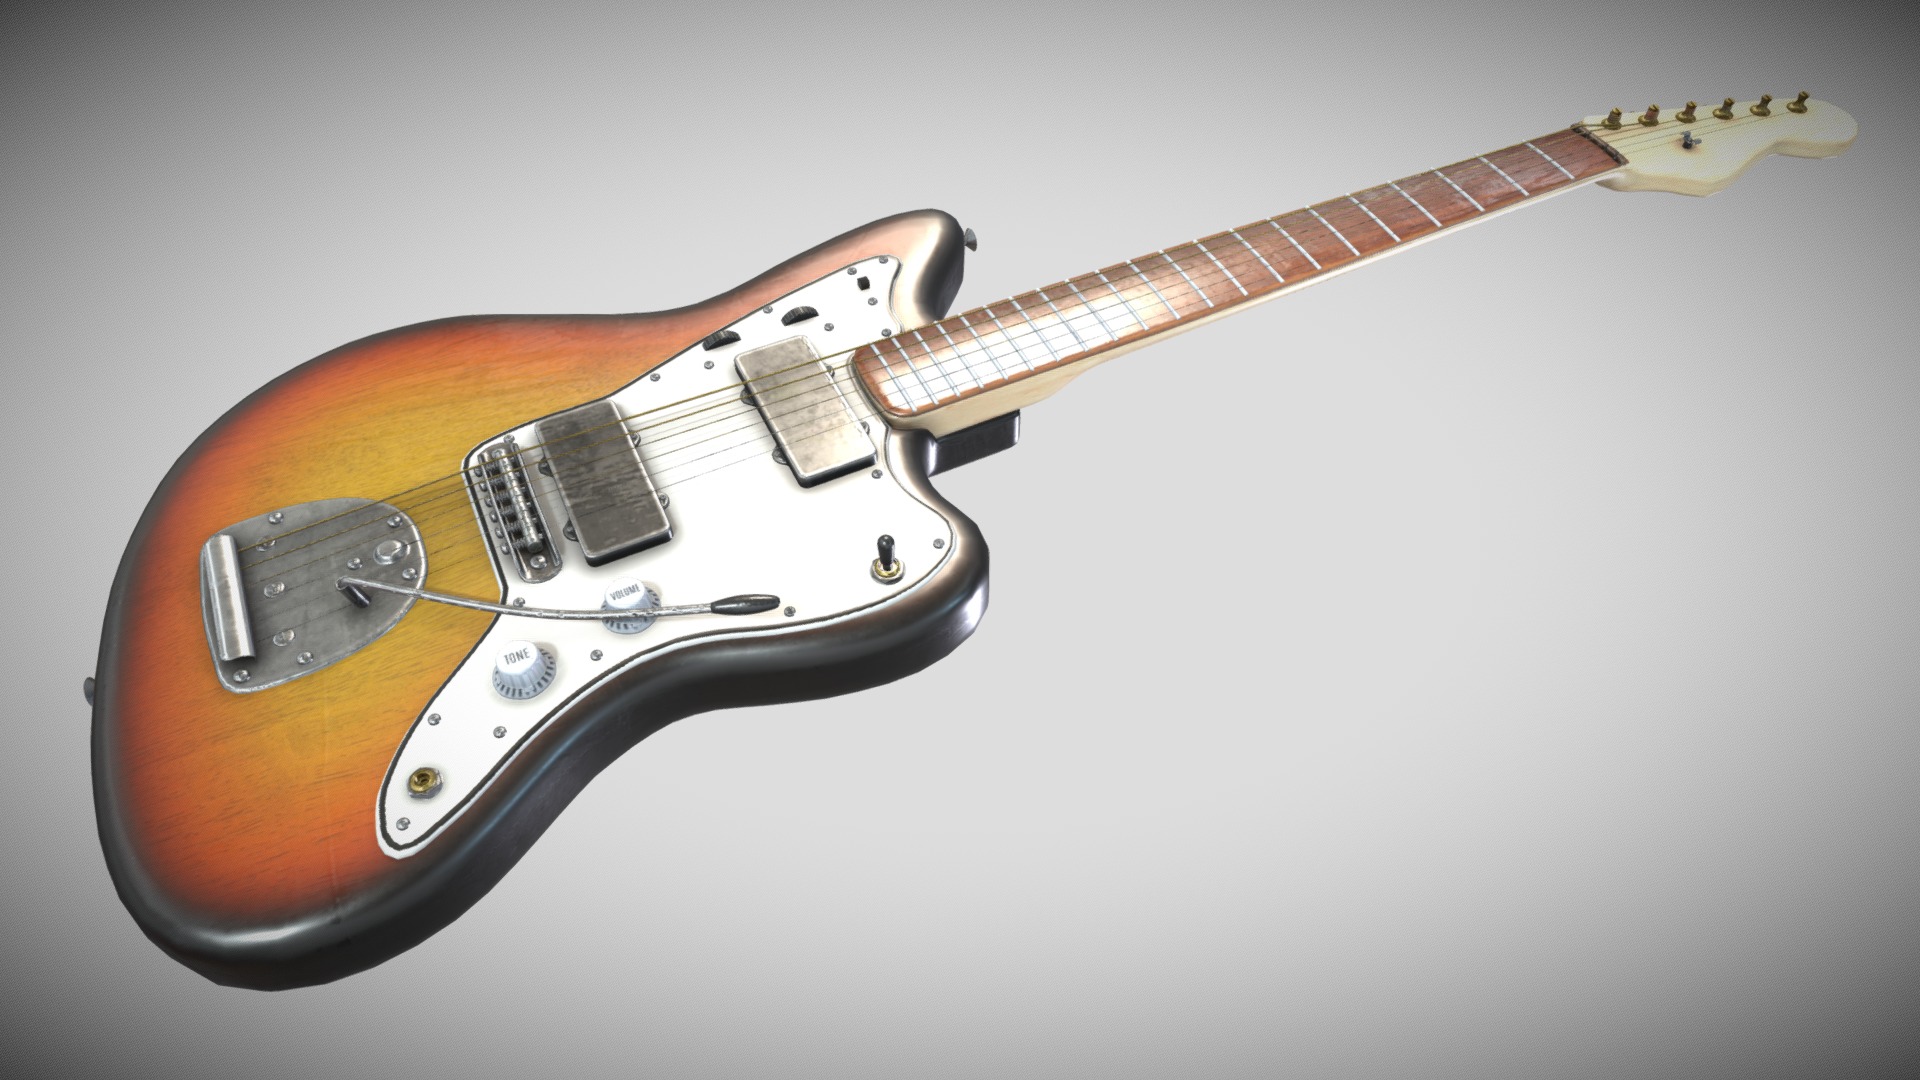 3D model Fender Guitar - This is a 3D model of the Fender Guitar. The 3D model is about a brown electric guitar.